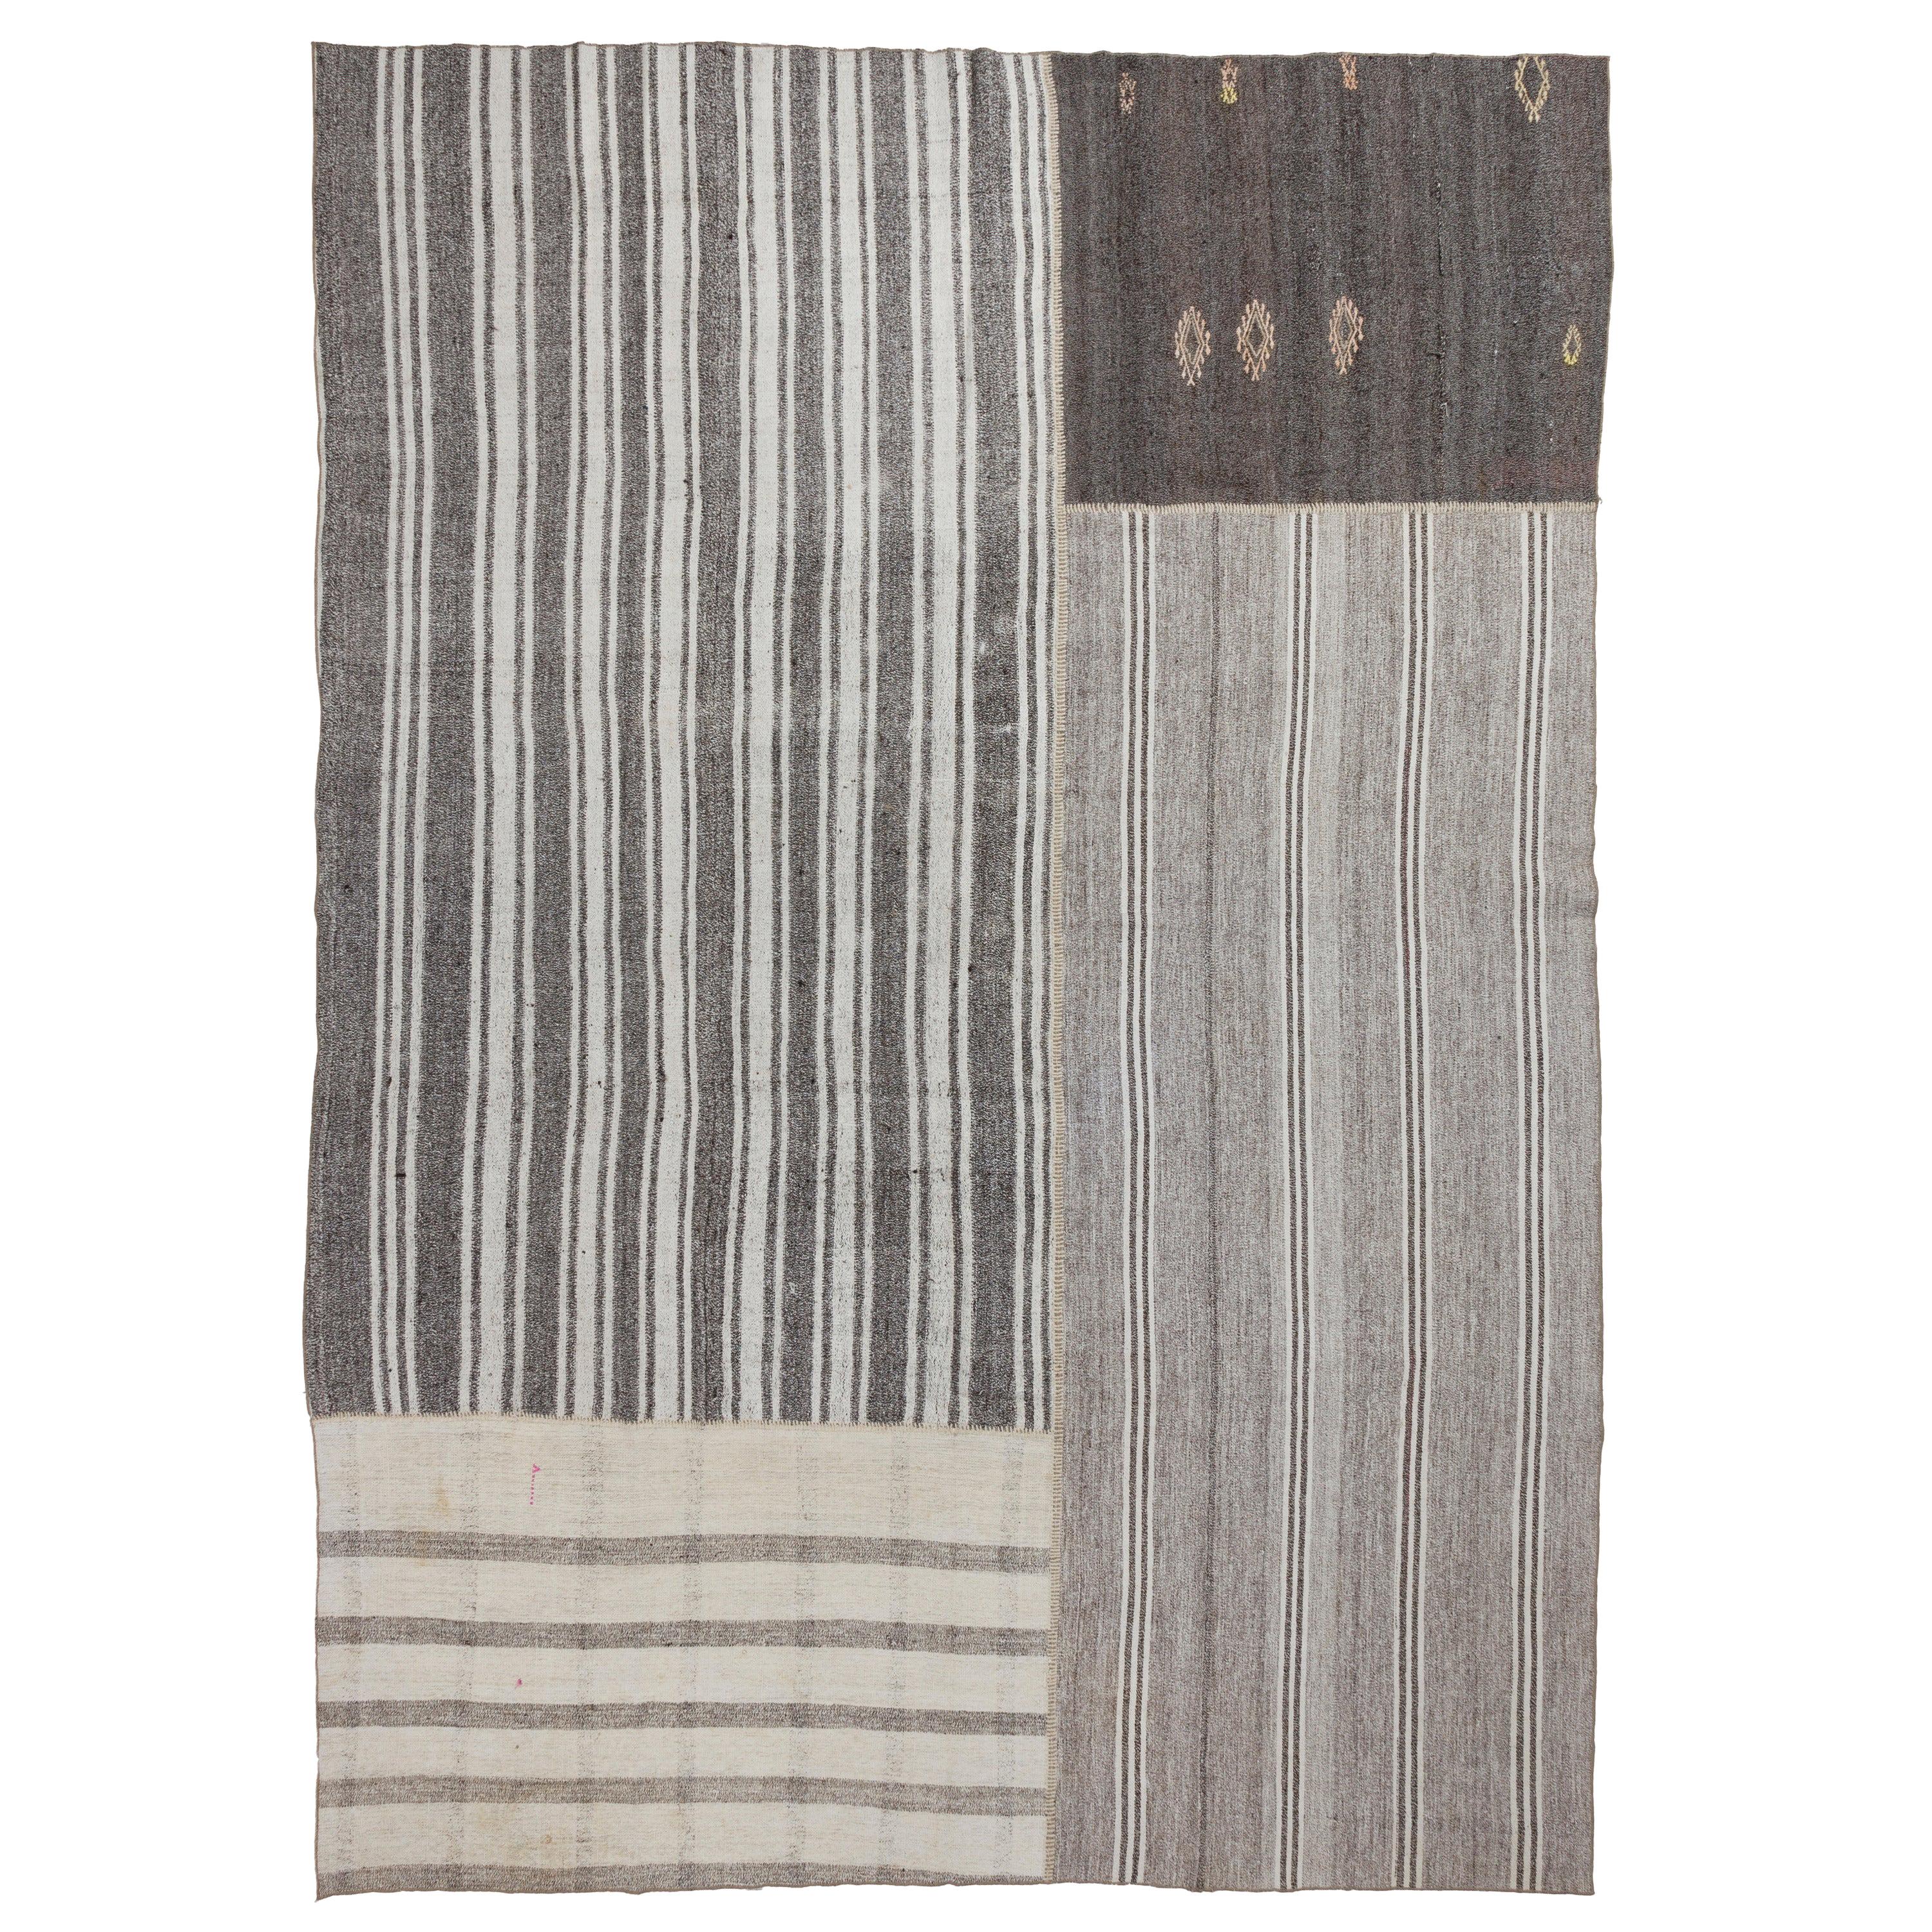 Vintage Hand-Woven Central Anatolian Flat-Woven Kilims, Reimagined